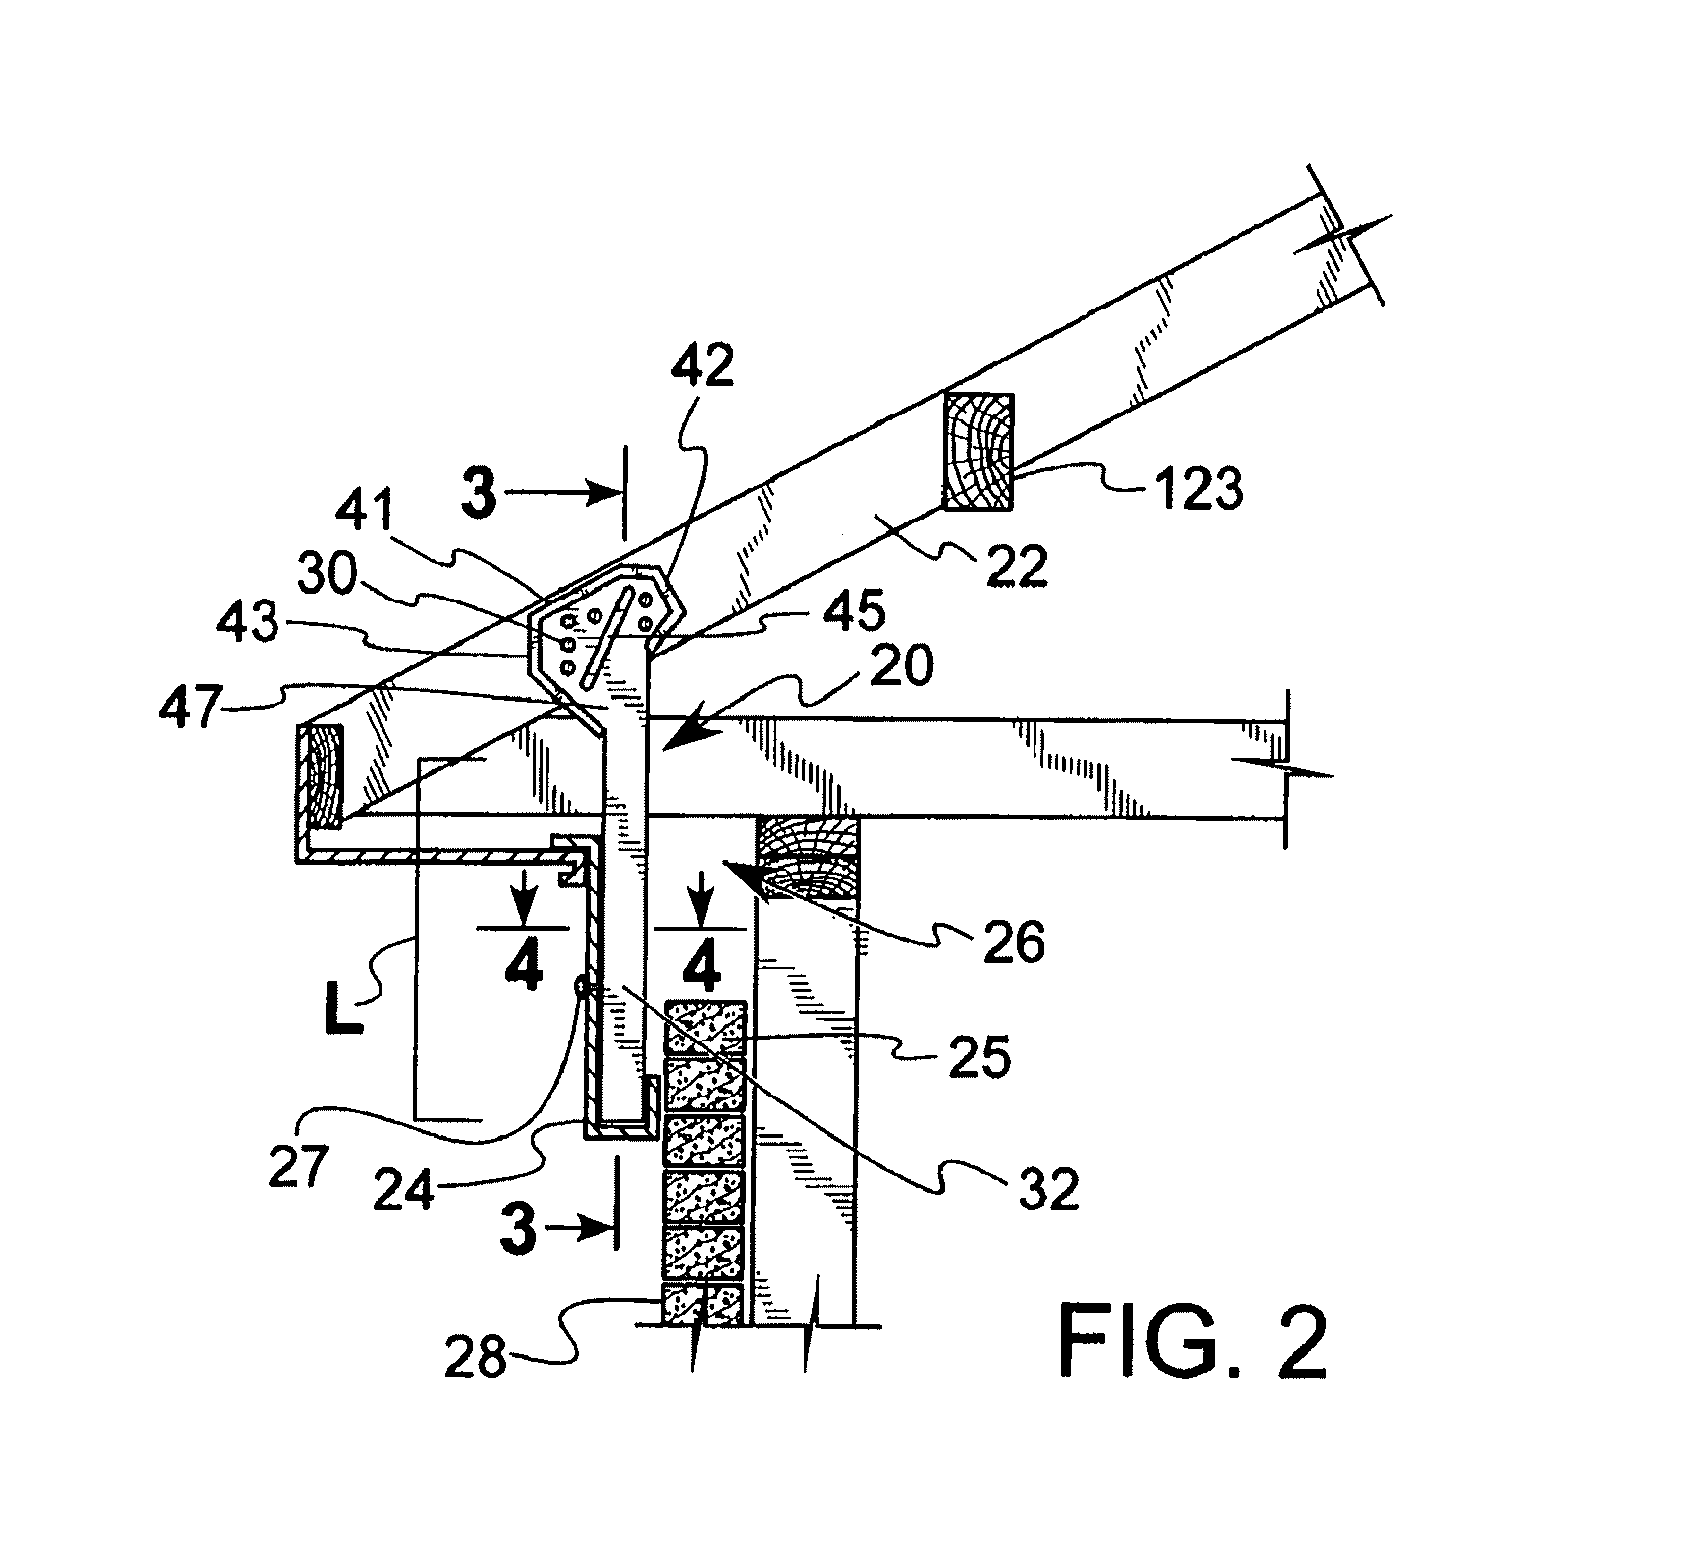 Method for securing a panel over a gap in an exterior portion of a building